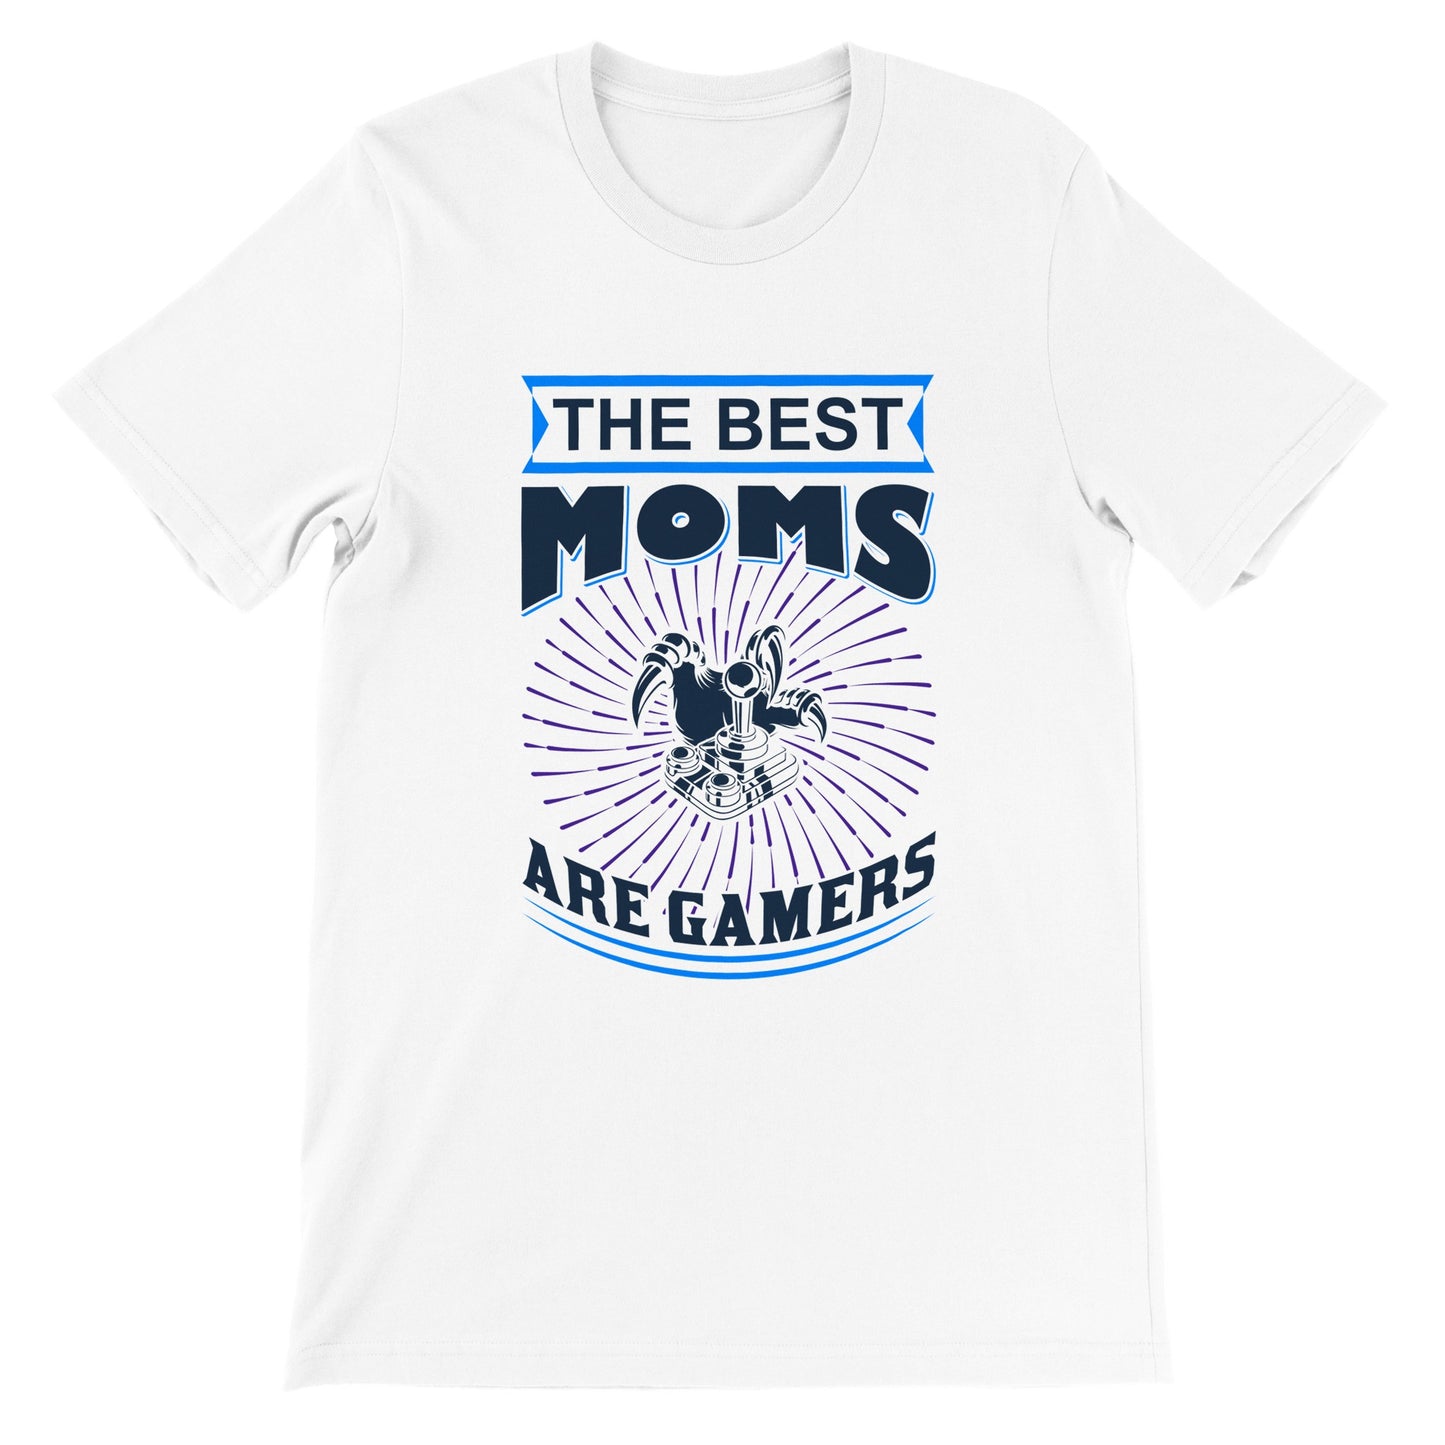 Gaming T-shirts - The Best Moms Are Gamers - Premium Unisex T-shirt